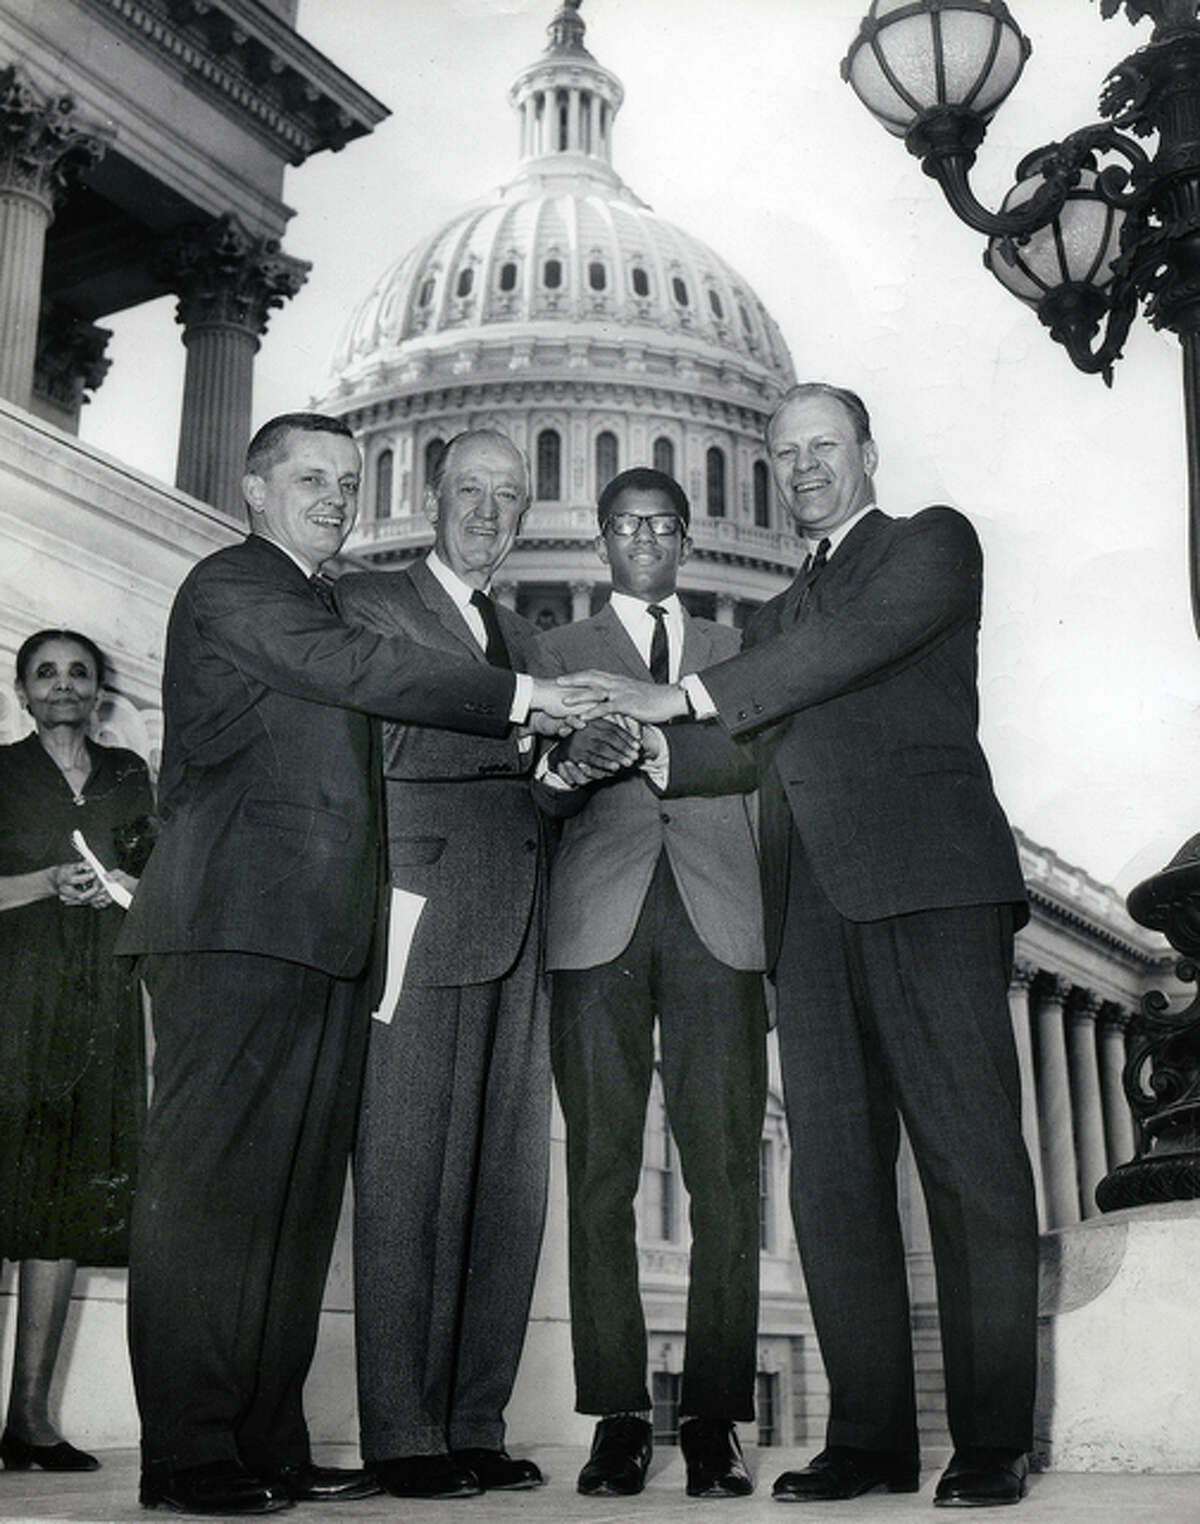 Collection of the U.S. House of Representatives Frank Mitchell stands outside the U.S. Capitol in 1965 after being appointed the first African-American congressional page. His history-setting appointment was made by Gerald Ford through former Congressman Paul Findley of Jacksonville.